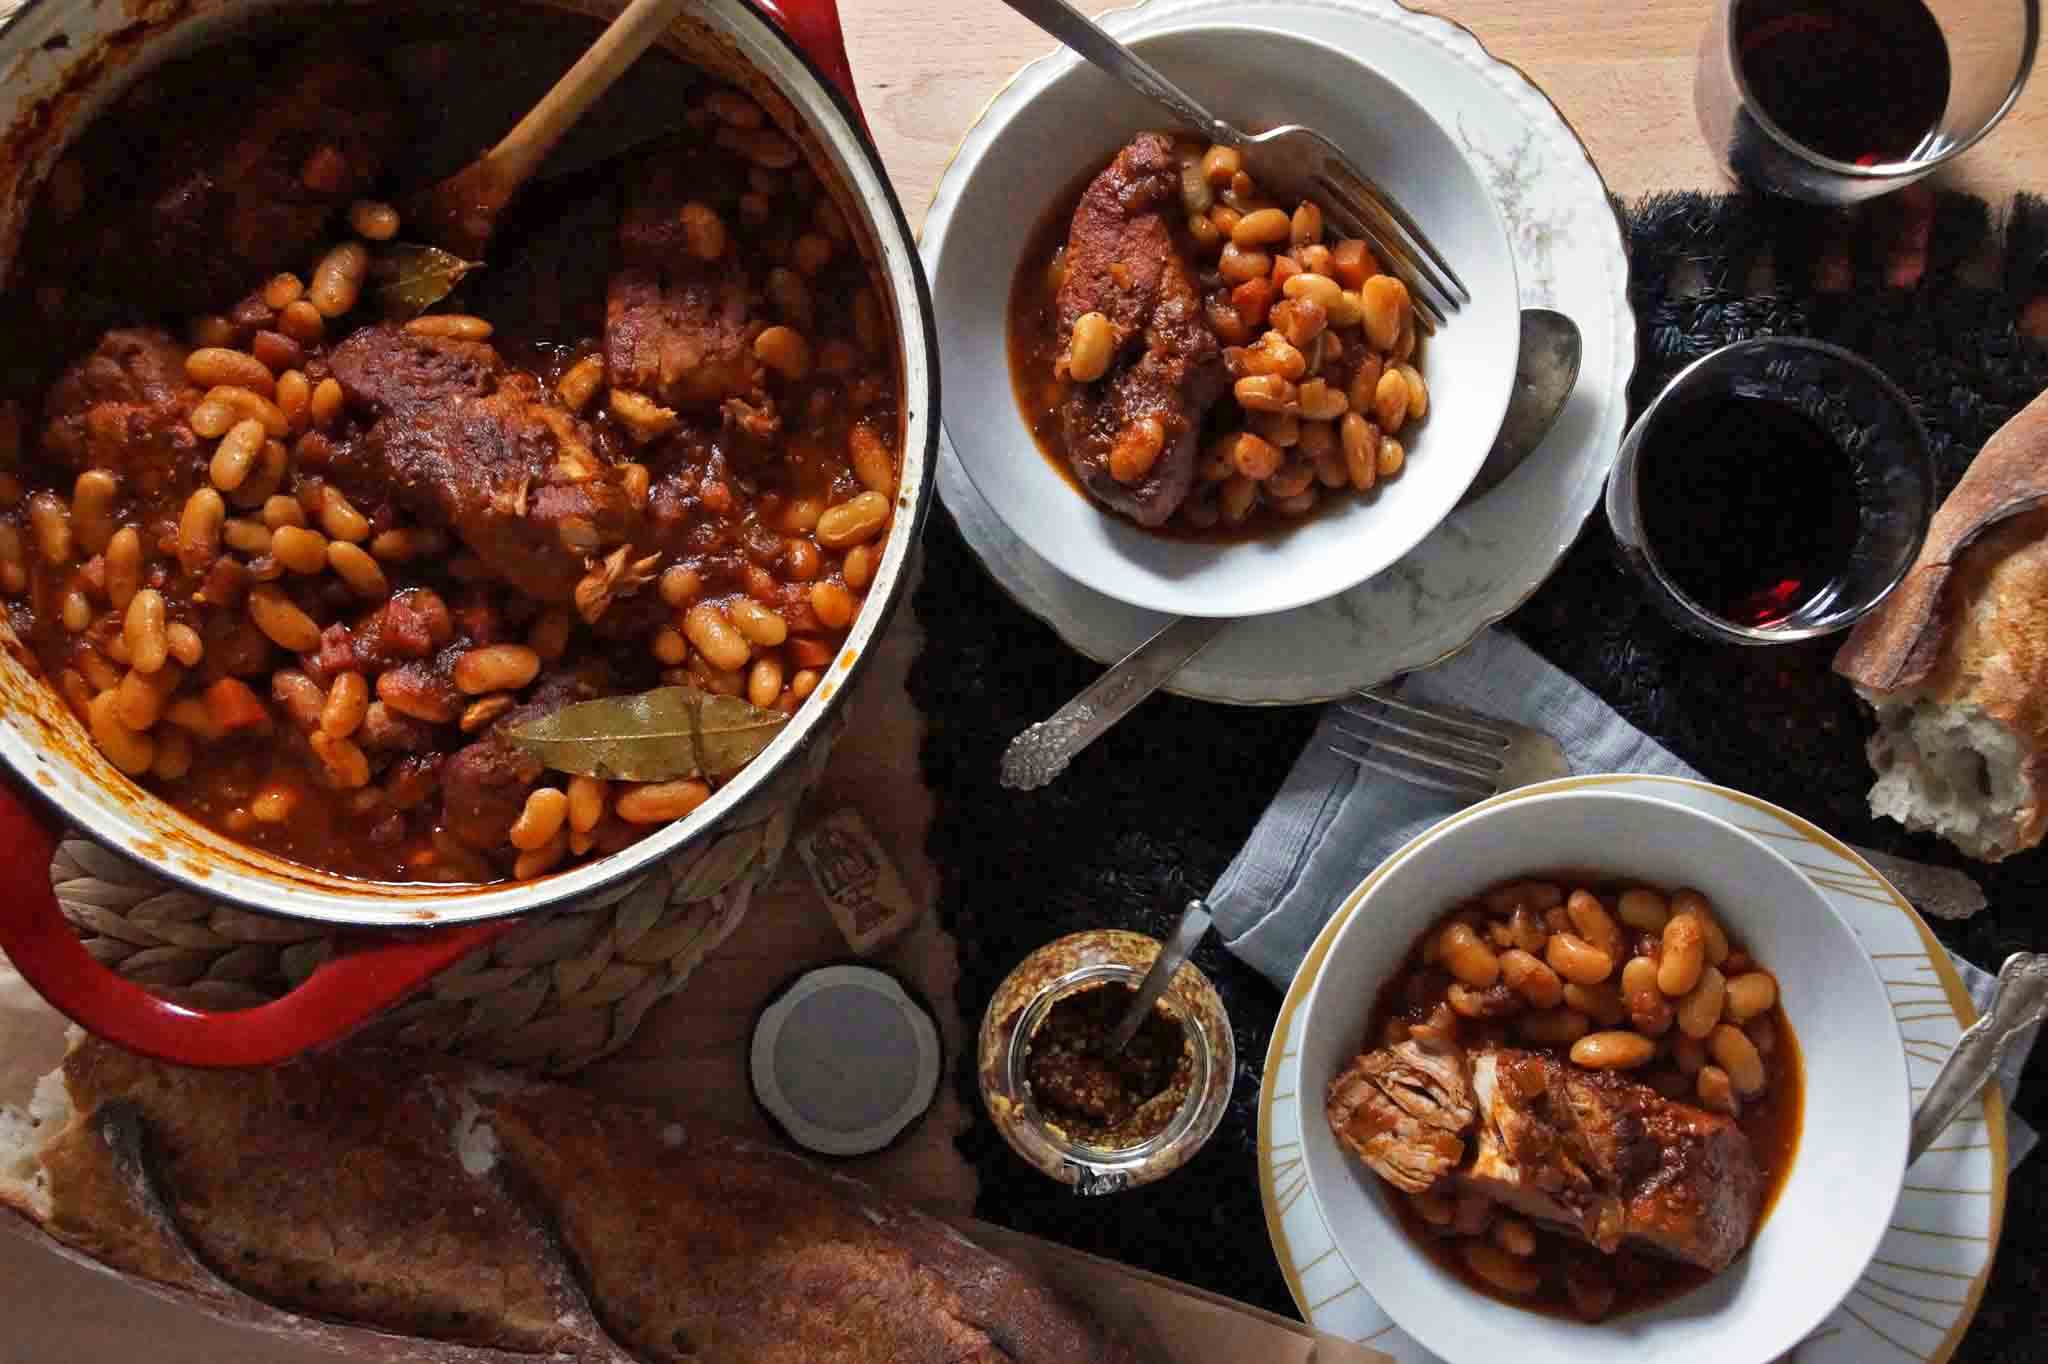 Cider Braised Pork Ribs and Beans